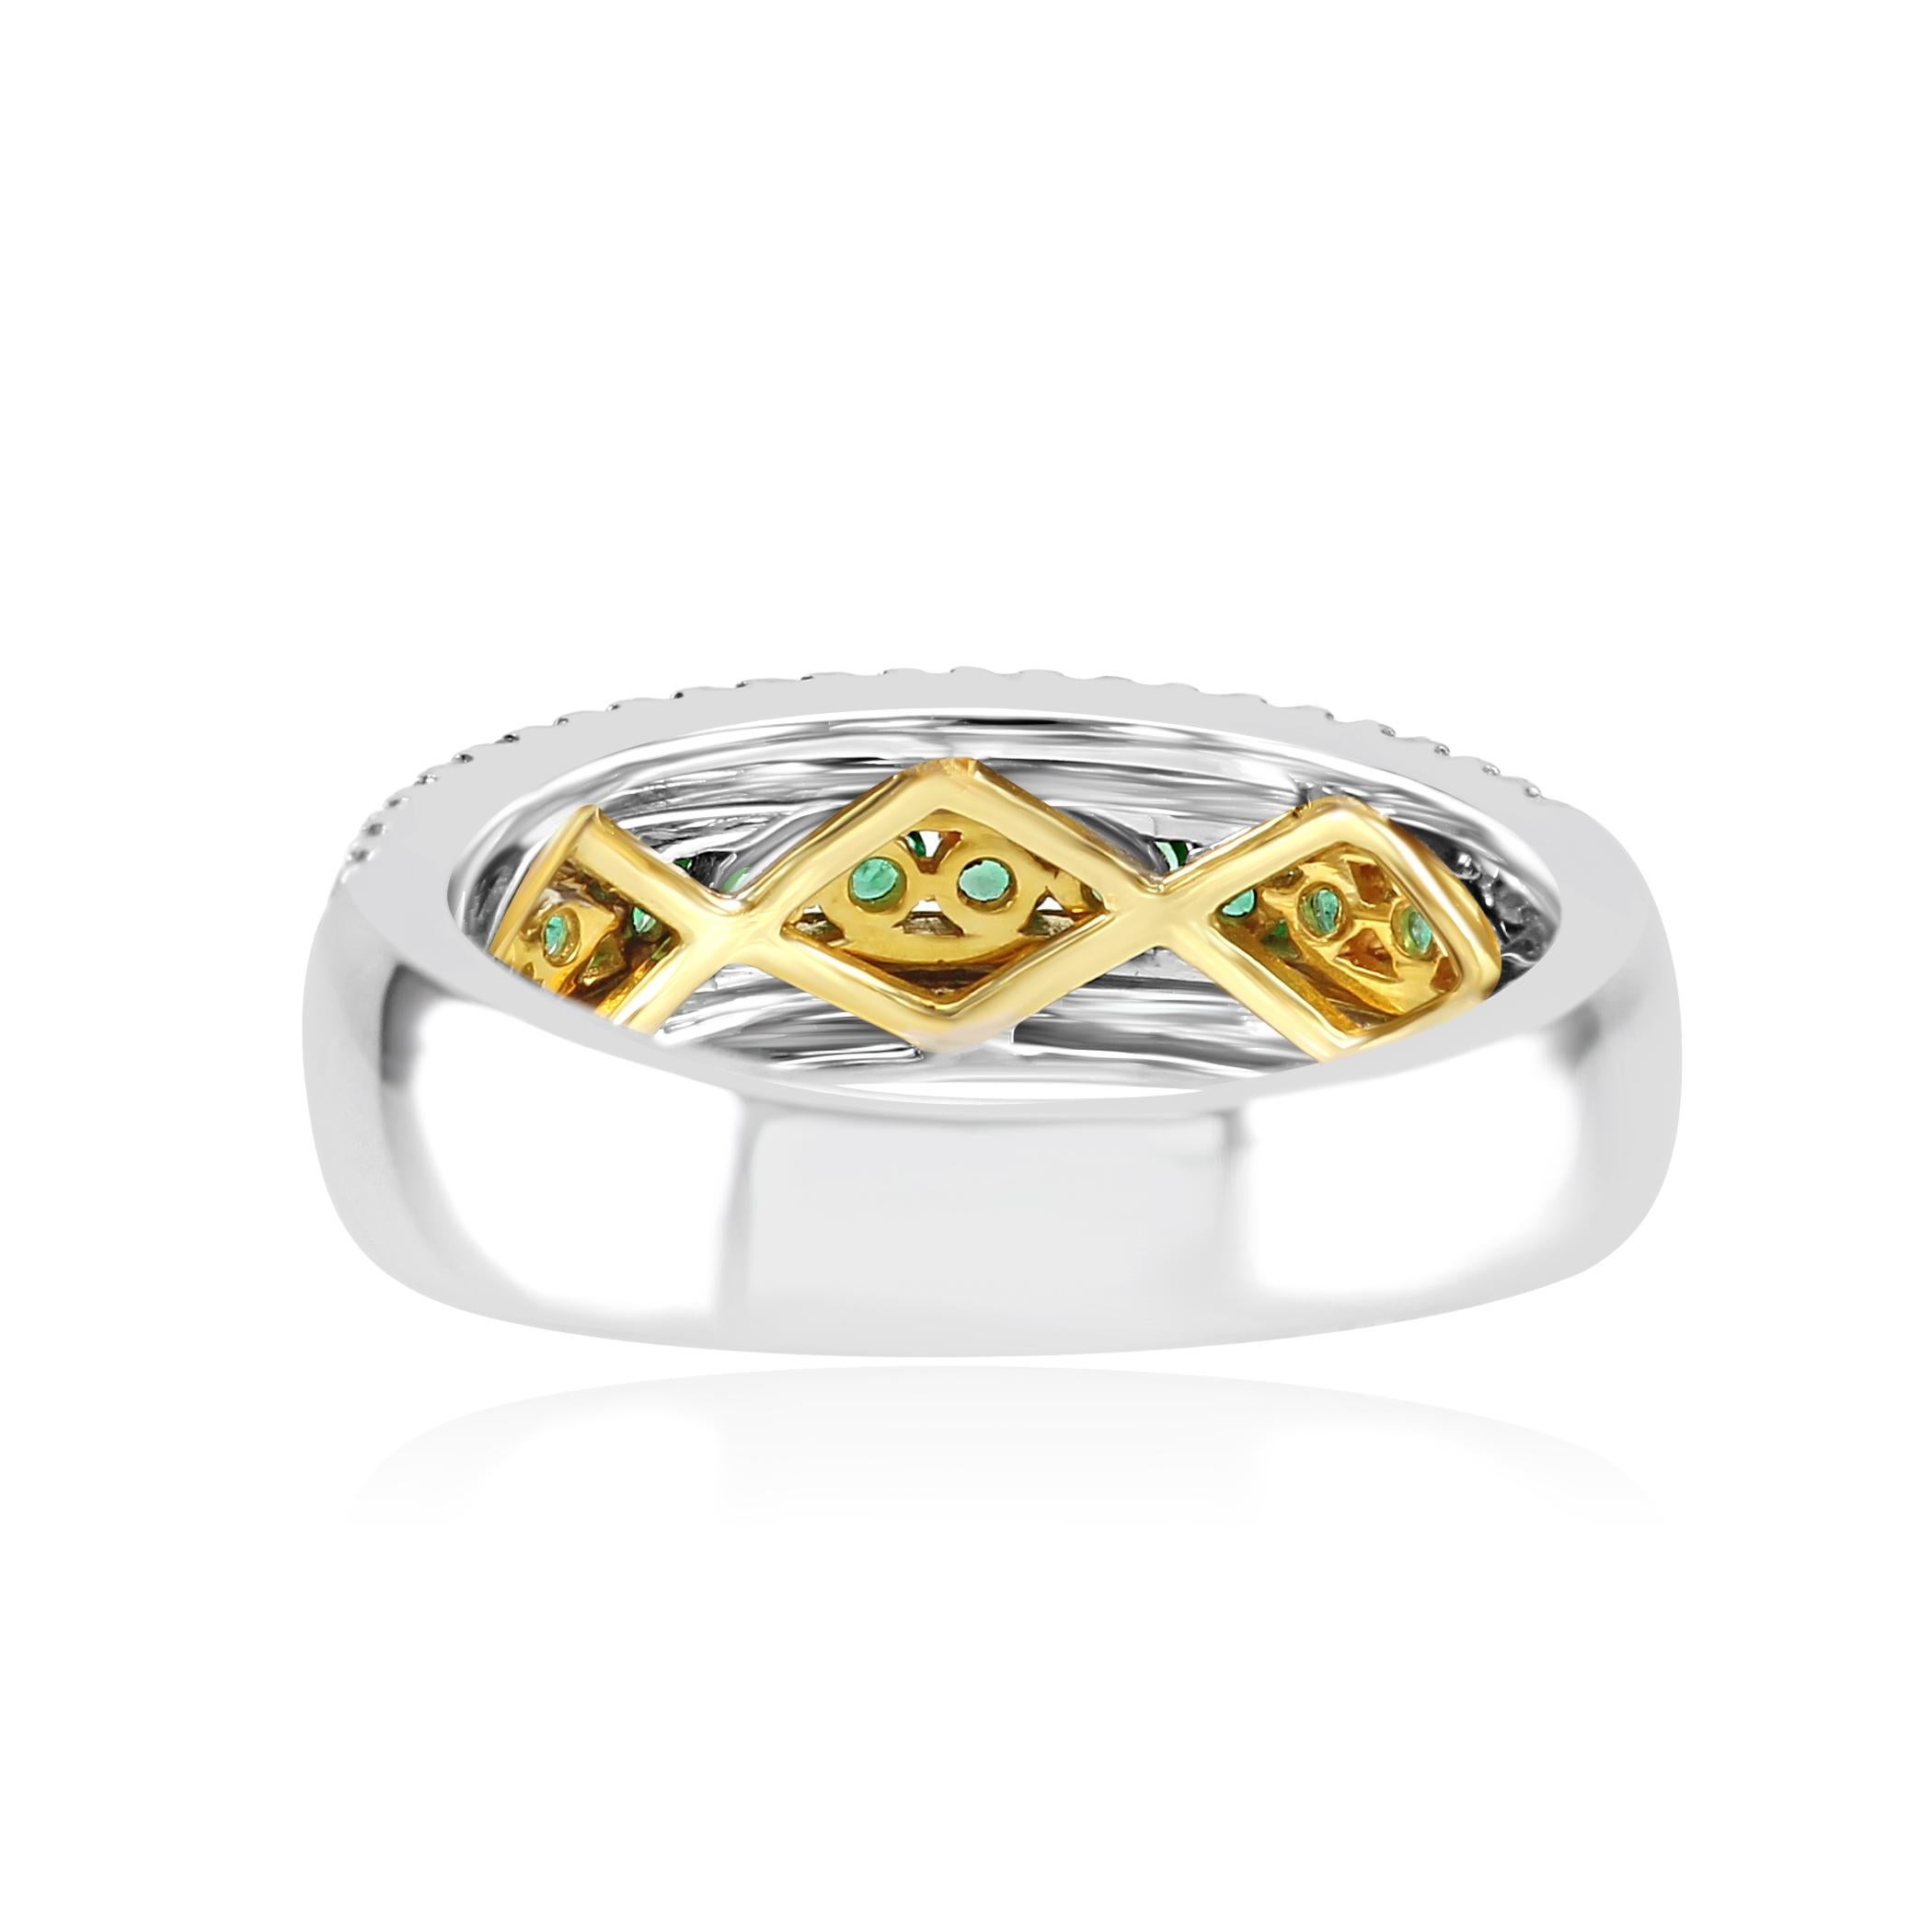 Women's or Men's Emerald Round Diamond Three-Row Two-Color Gold Fashion Cocktail Band Ring